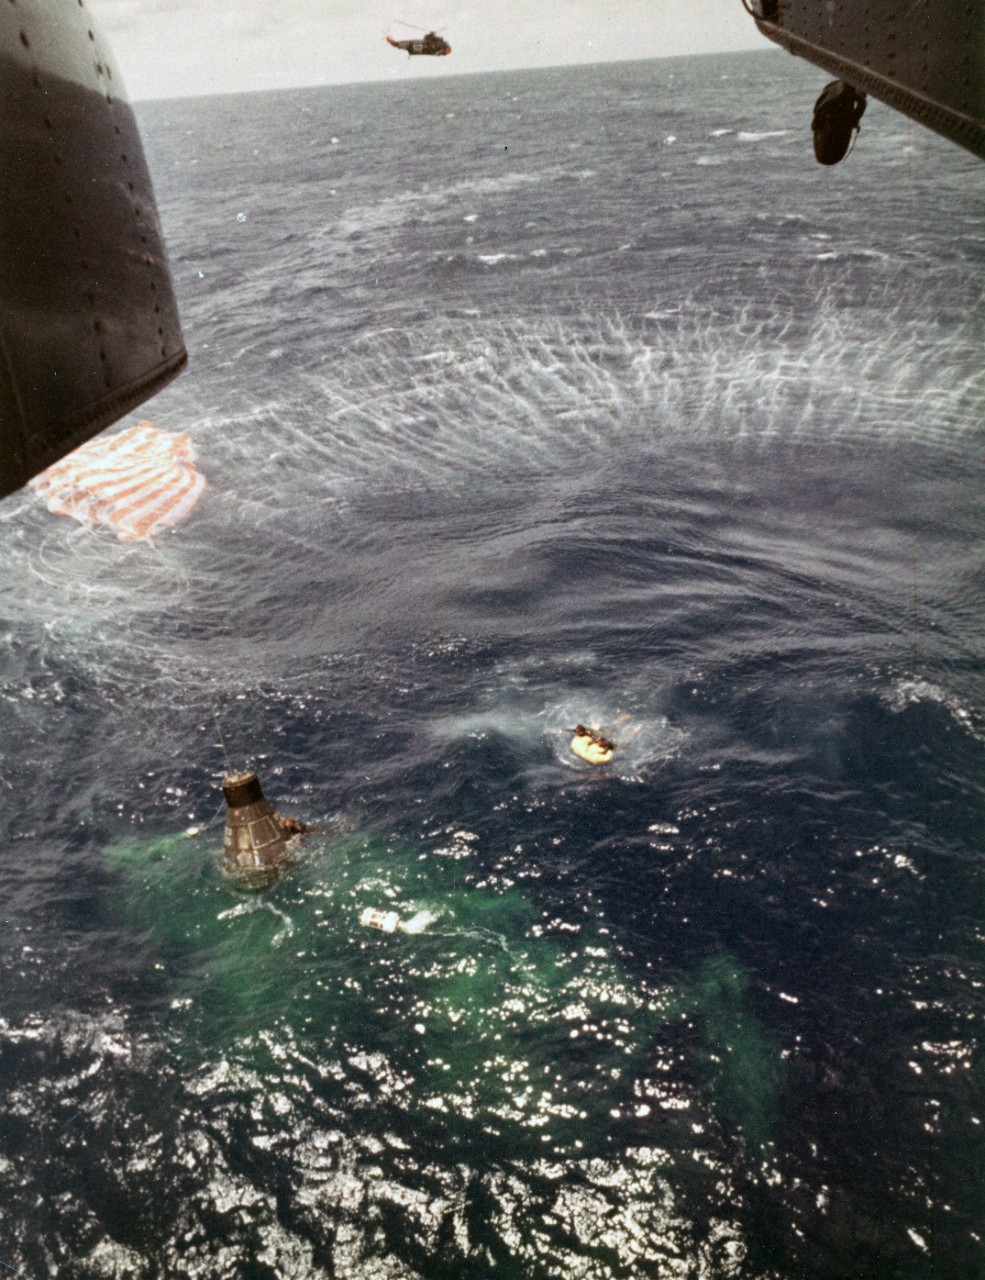 A U.S. Navy frogman, deployed from the hovering helicopter, swims next to the spacecraft and makes contact with Astronaut Cooper inside, as his fellow team members bring up the flotation gear to be attached to the spacecraft. The main chute floats at the top left, and the ejected unused reserve chute floats at the lower right of the spacecraft in the green dye area.